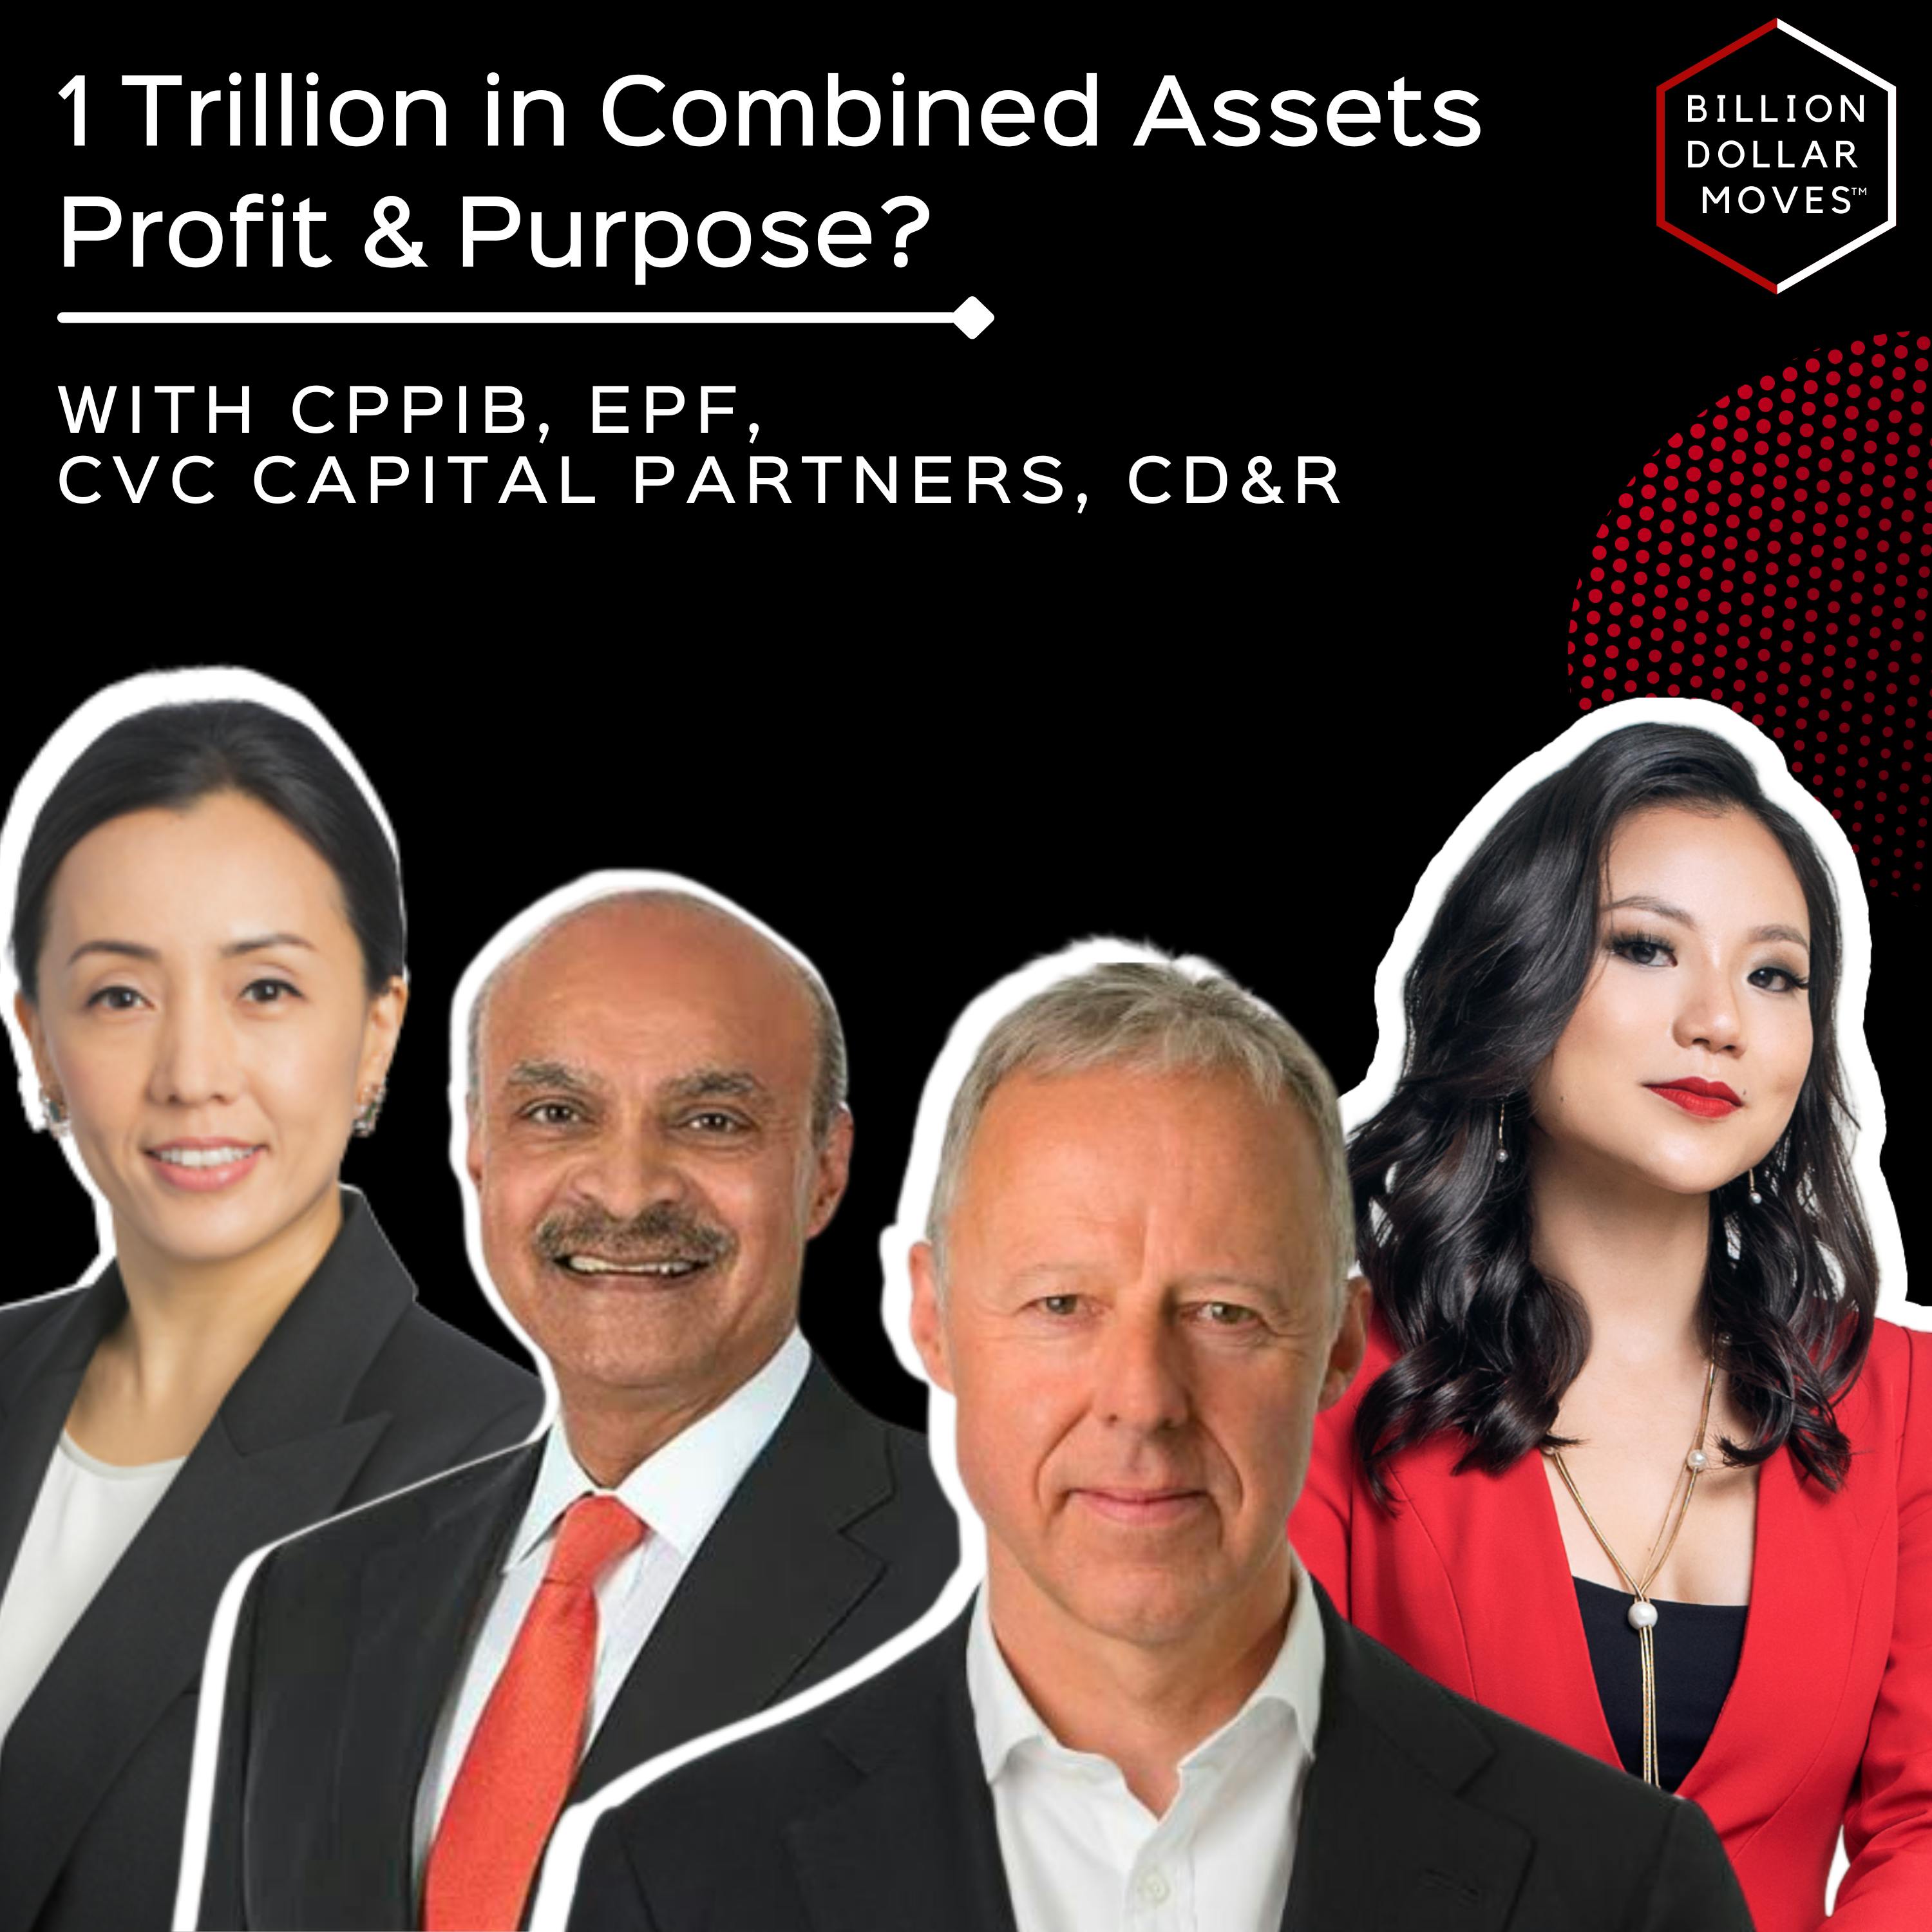 {BONUS} Multi-Billion Firms' Chief Investors, CPP Investments, CVC Capital Partners, EPF, CD&R on Actually Aligning Profit & Purpose in Private Equity — Davos Takeaway 3